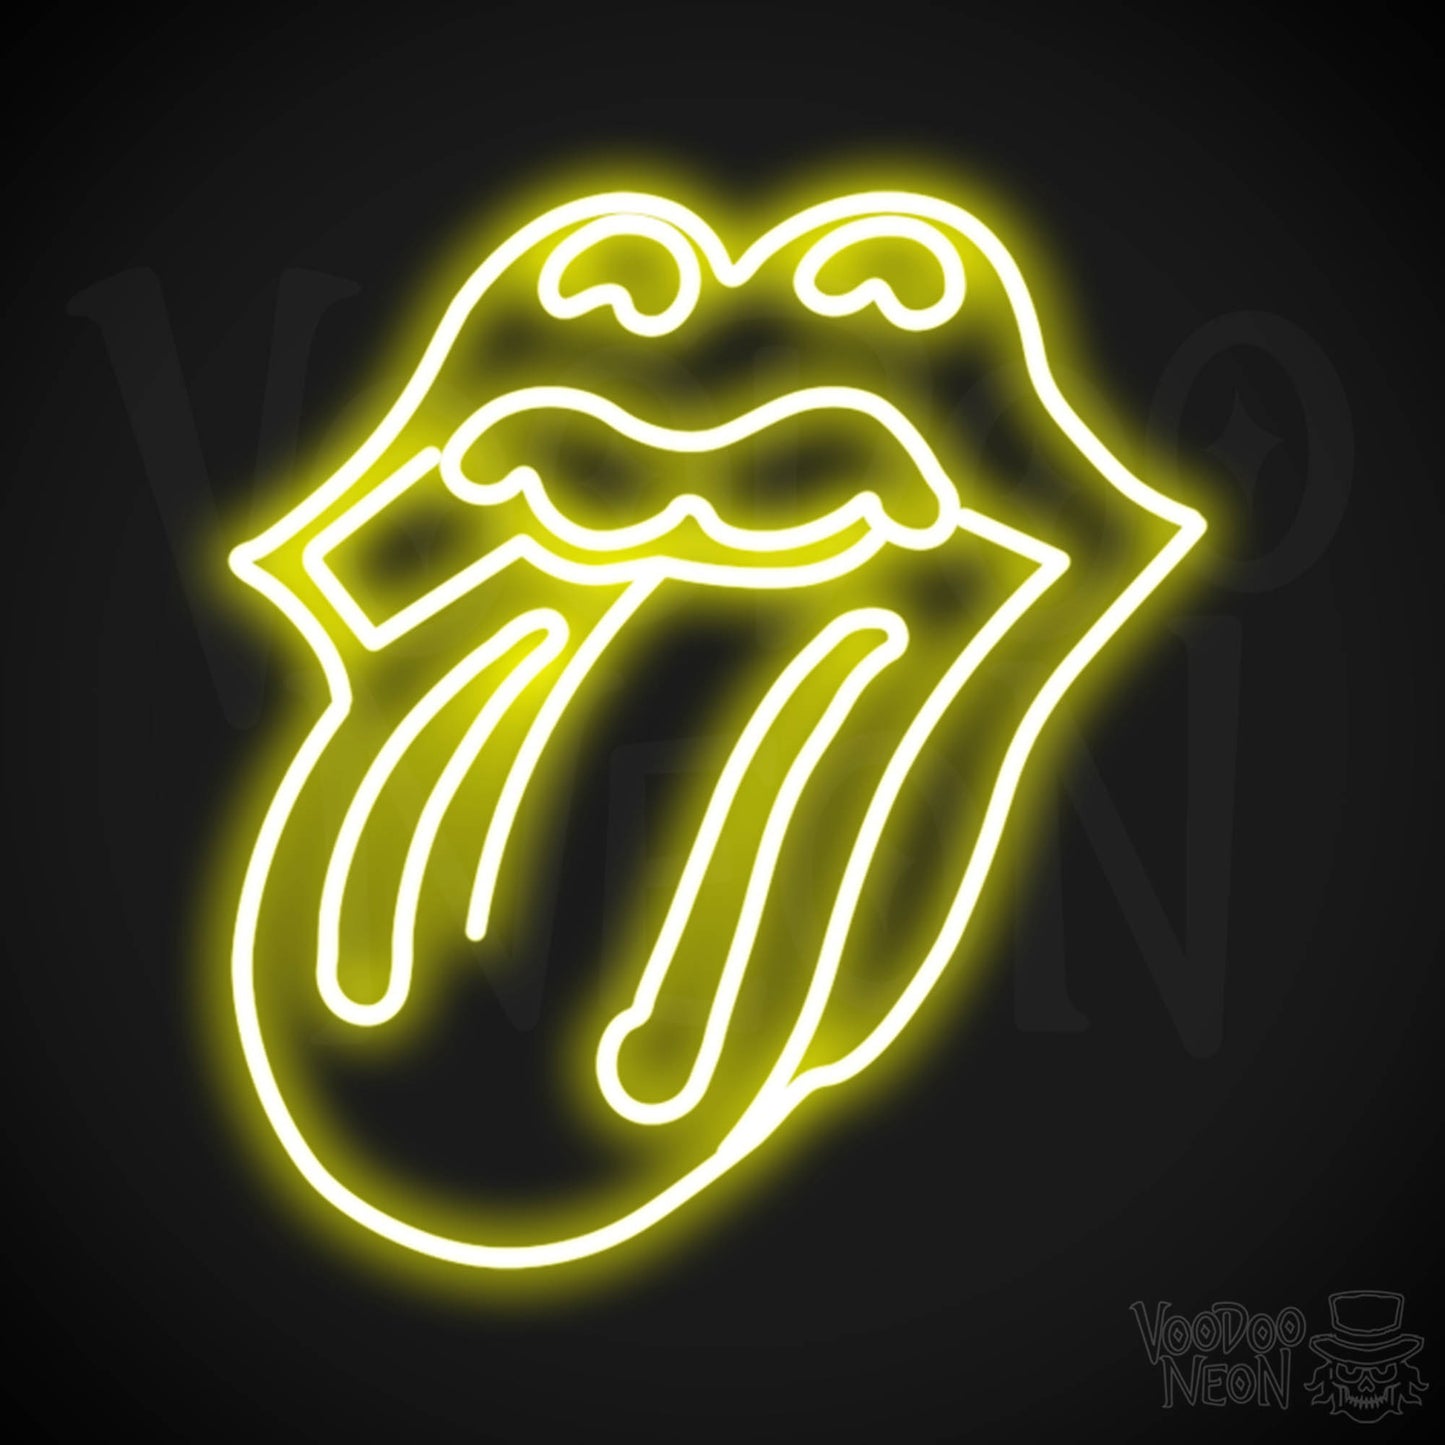 Rolling Stones Neon Sign - Rolling Stones Sign - Neon Rolling Stones Logo Wall Art - Color Yellow